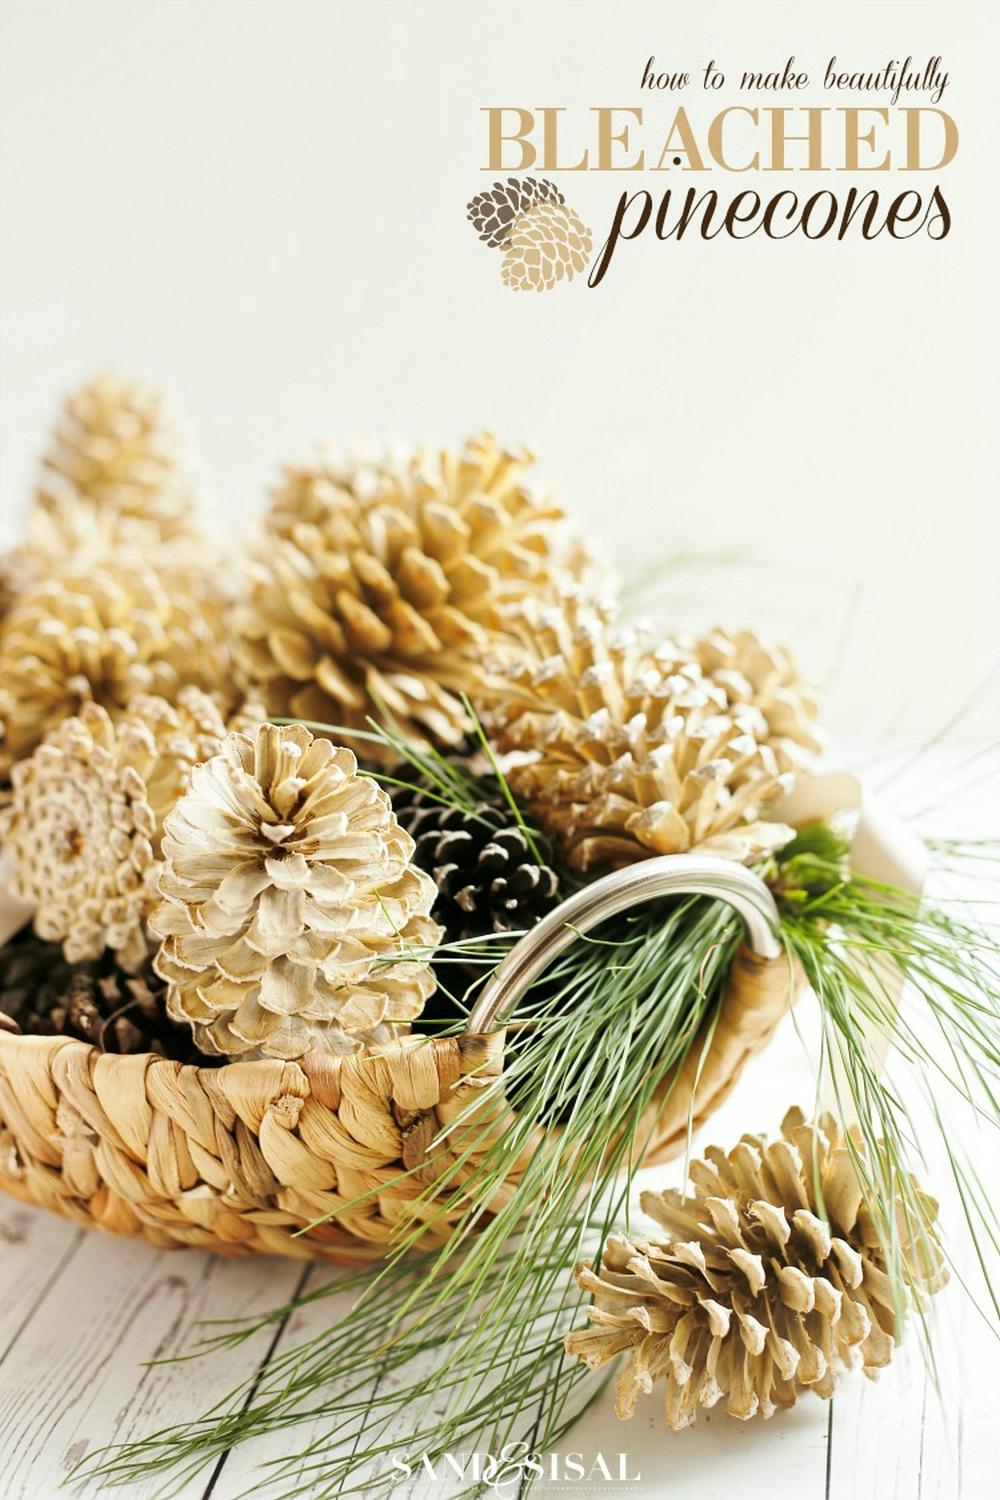 A basket of bleached pinecones thanksgiving centerpiece